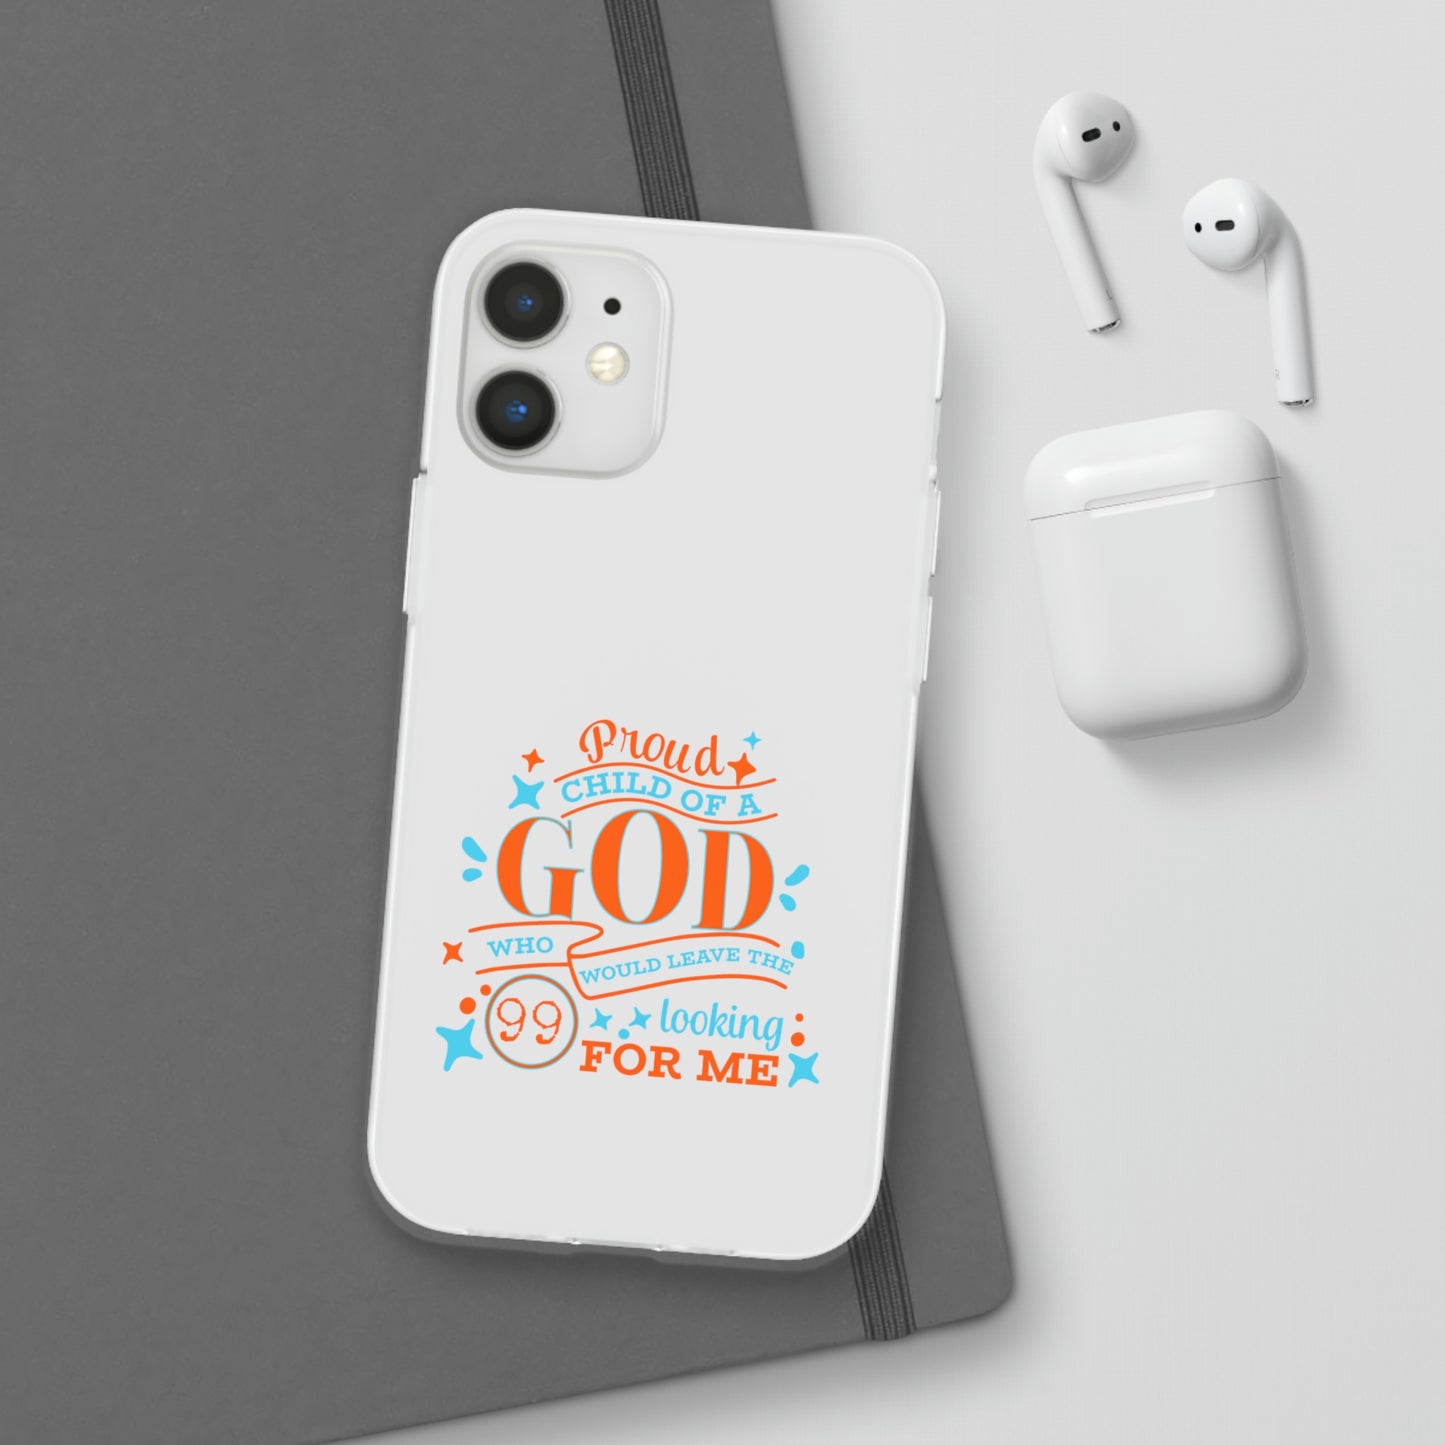 Proud Child Of A God Who Would Leave the 99 Looking For Me Flexi Phone Case